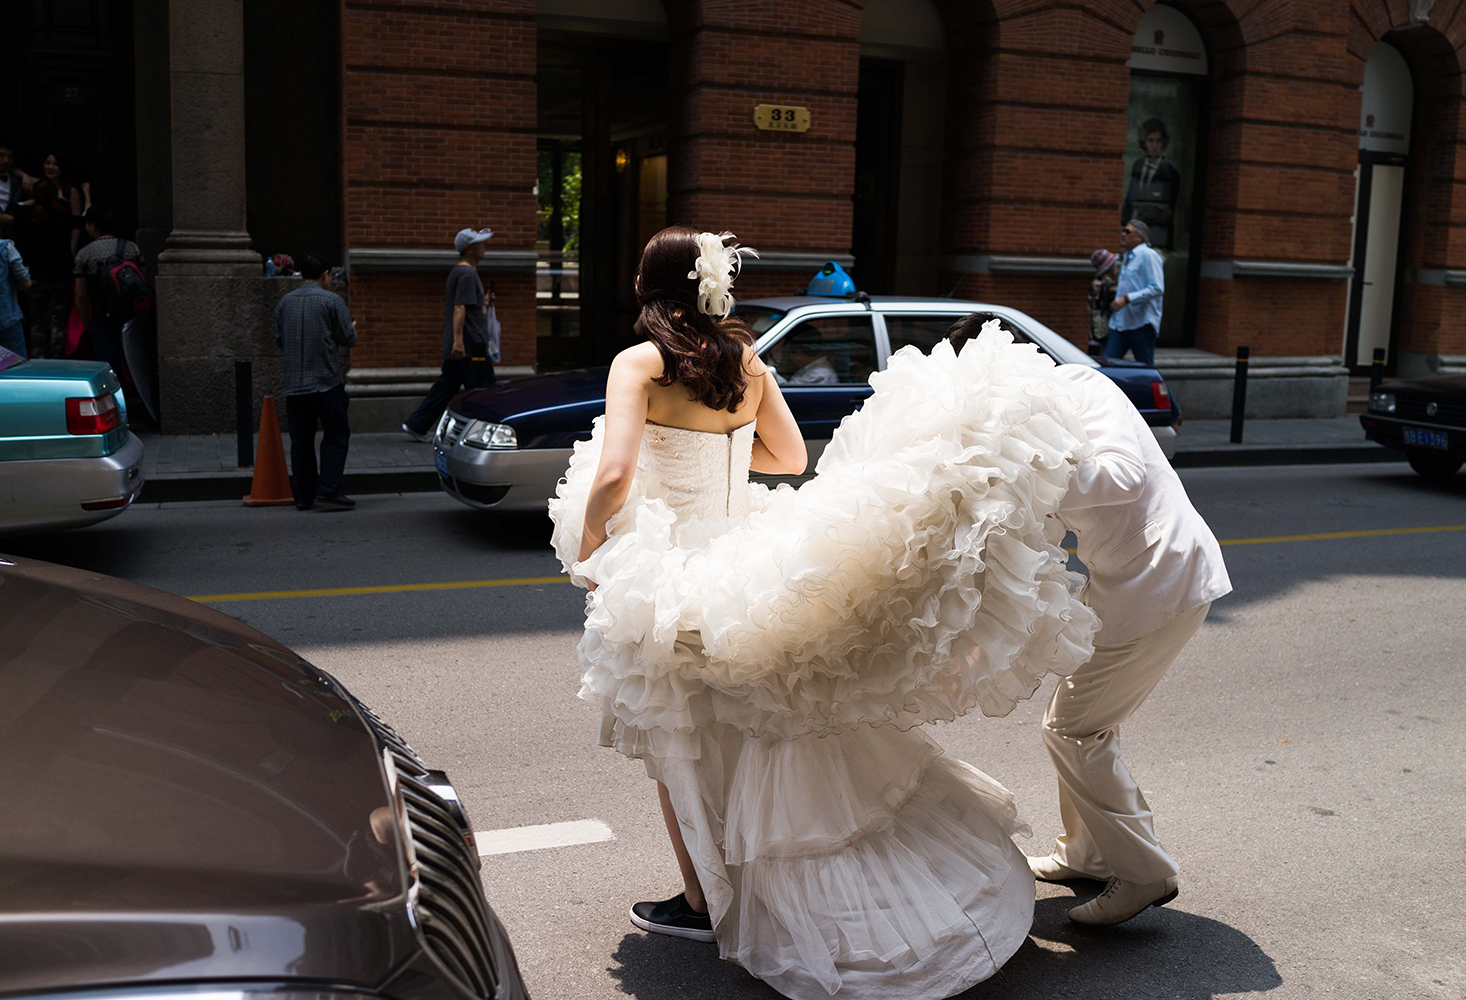 A bride-to-be has her dress adjusted during a photo shoot in Shanghai in May 2013.